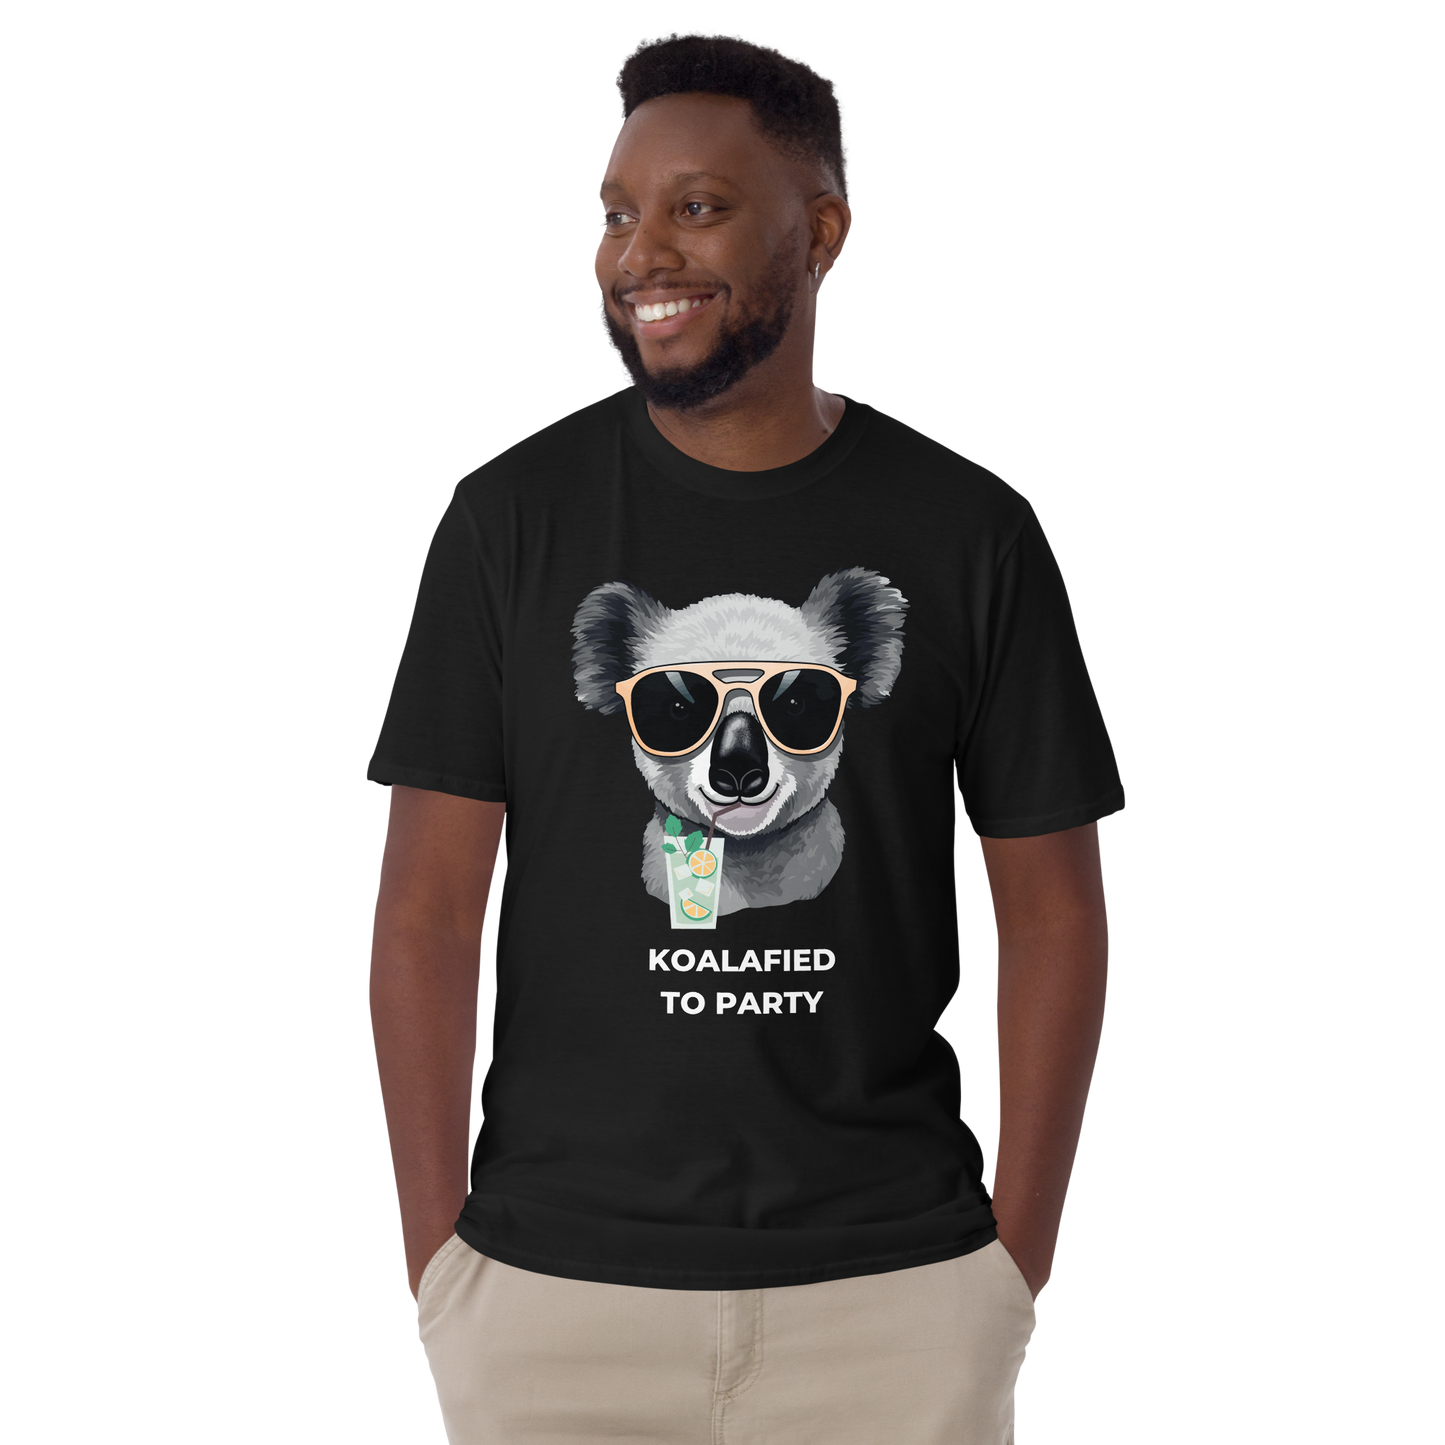 Smiling man wearing a Black Koala T-Shirt featuring an adorable Koalafied To Party graphic on the chest - Funny Graphic Koala T-Shirts - Boozy Fox